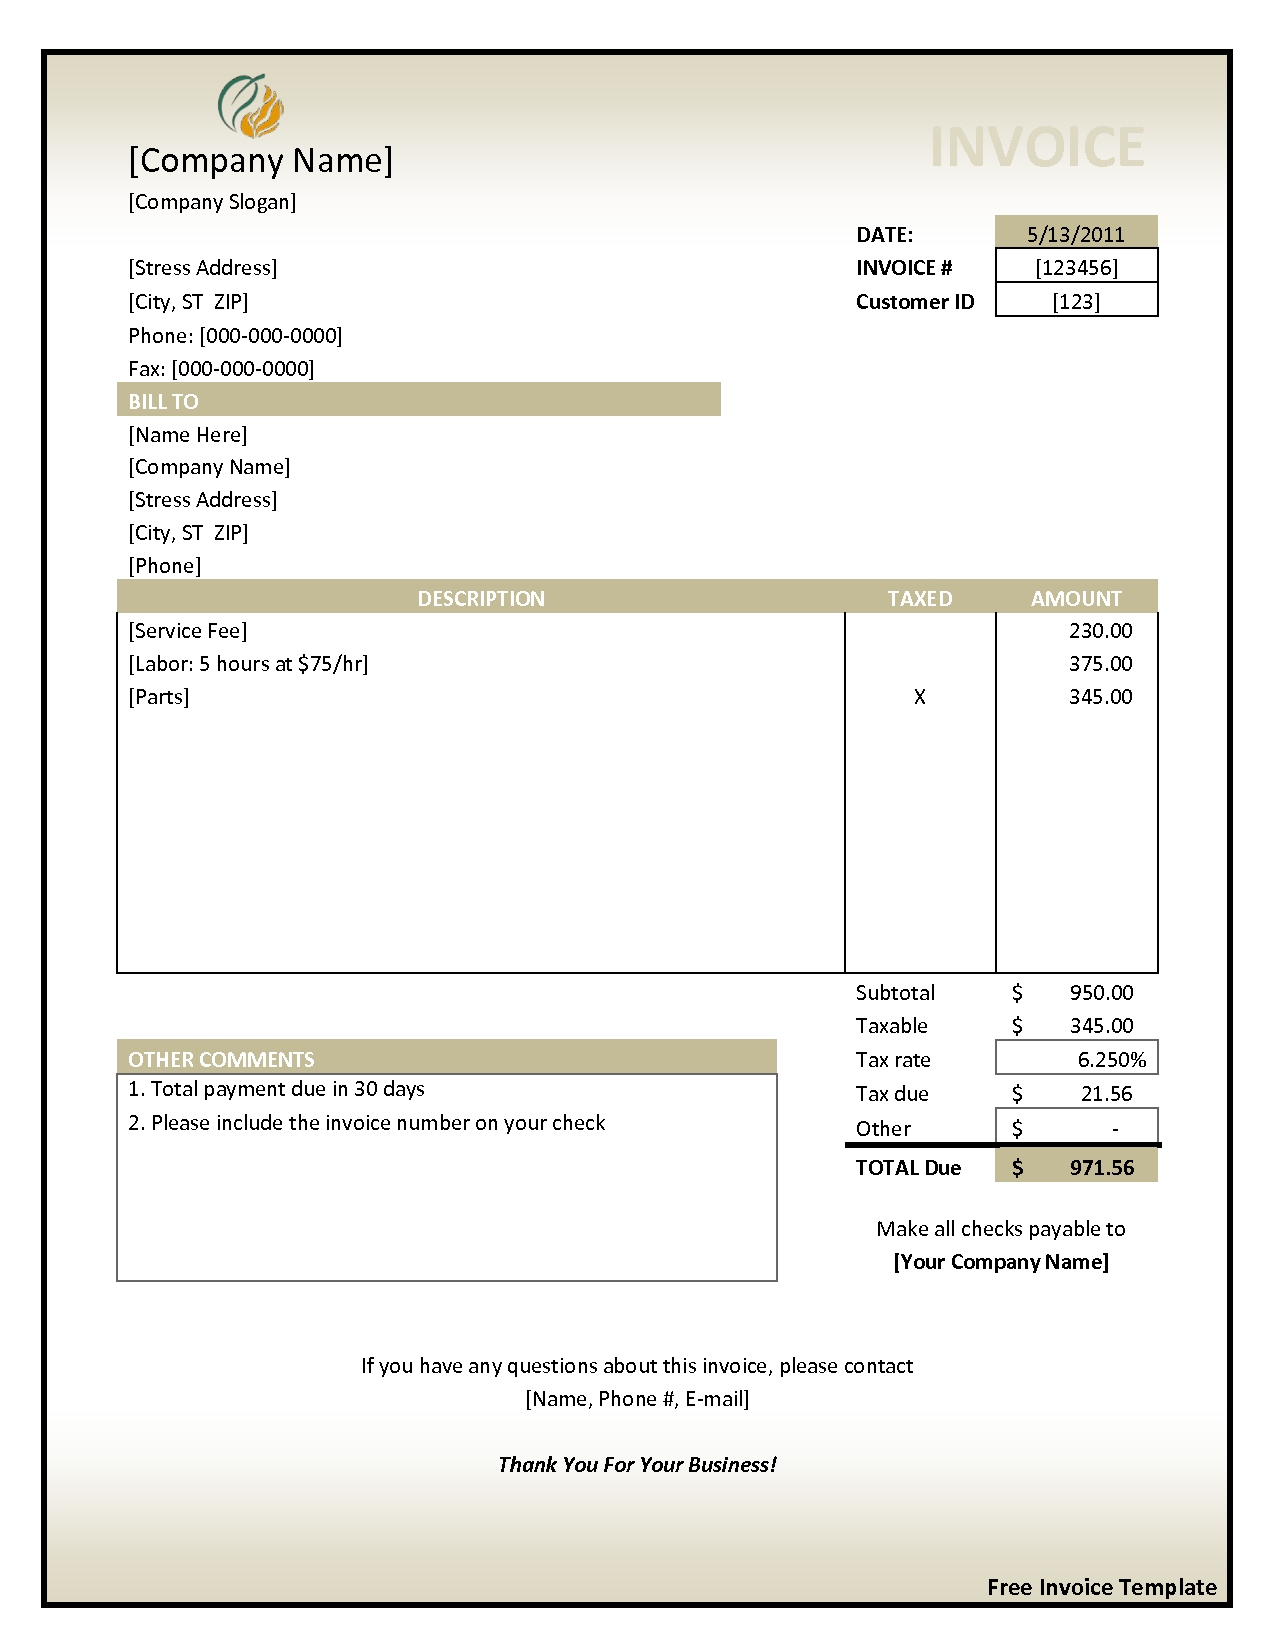 sample invoice template free best business template invoices templates for free